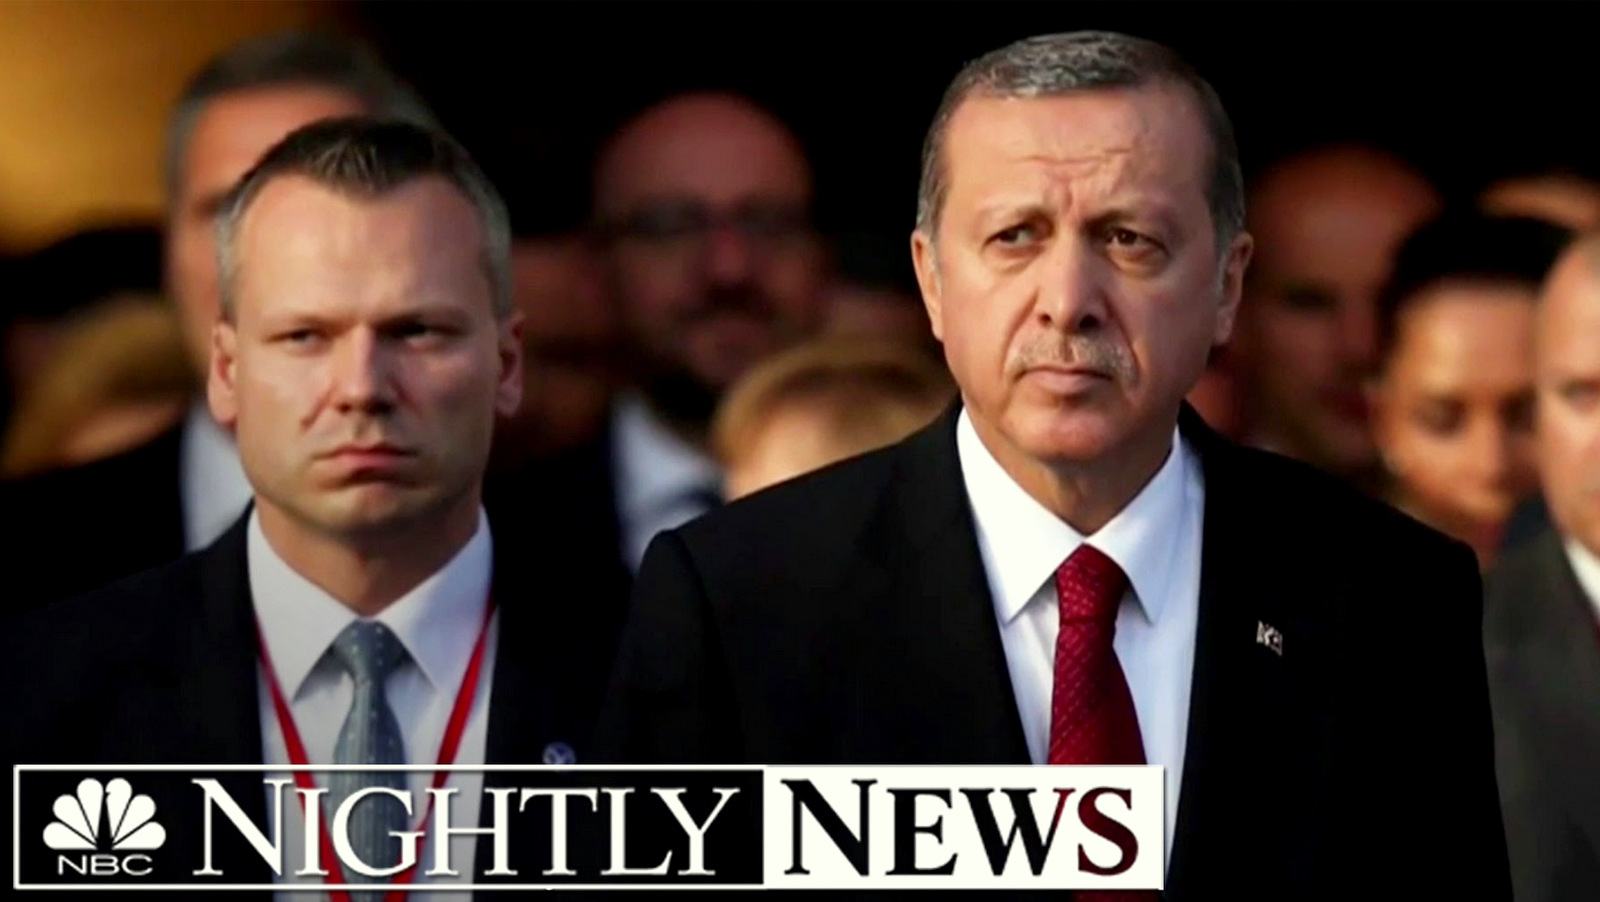 Newsbud is requesting that NBC and MSNBC issue a public retraction of and an official explanation for a false report about the Turkish Coup, claiming President Erdogan sought asylum in Germany, NBC quoted an anonymous senior Pentagon official as the source of the claim. (YouTube screenshot)